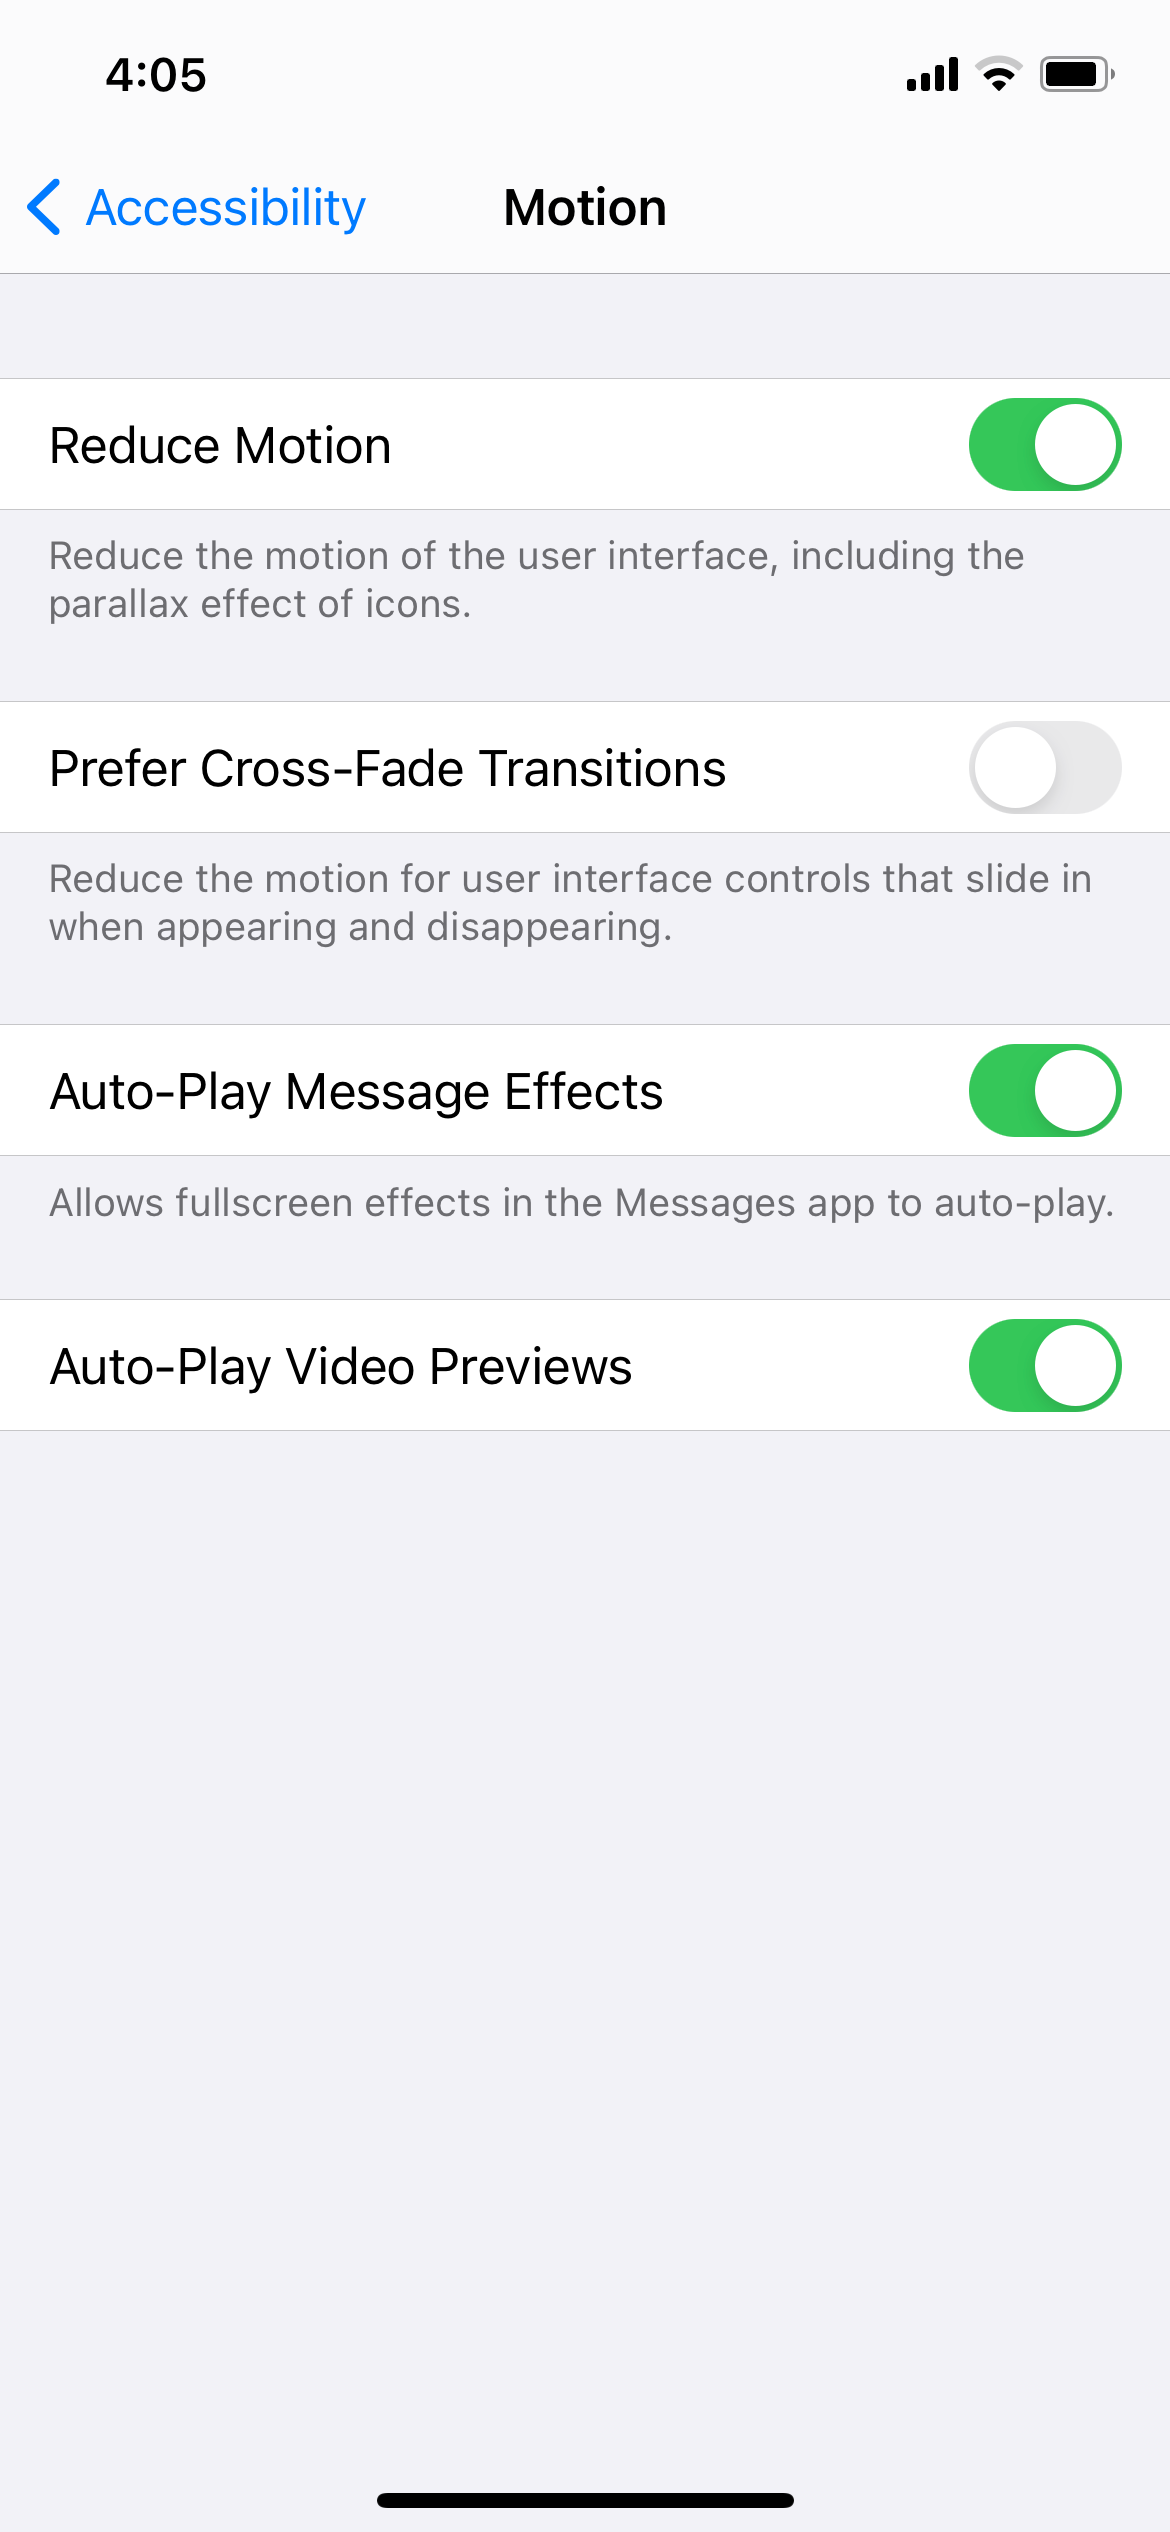 Motion Options, including Reduce Motion